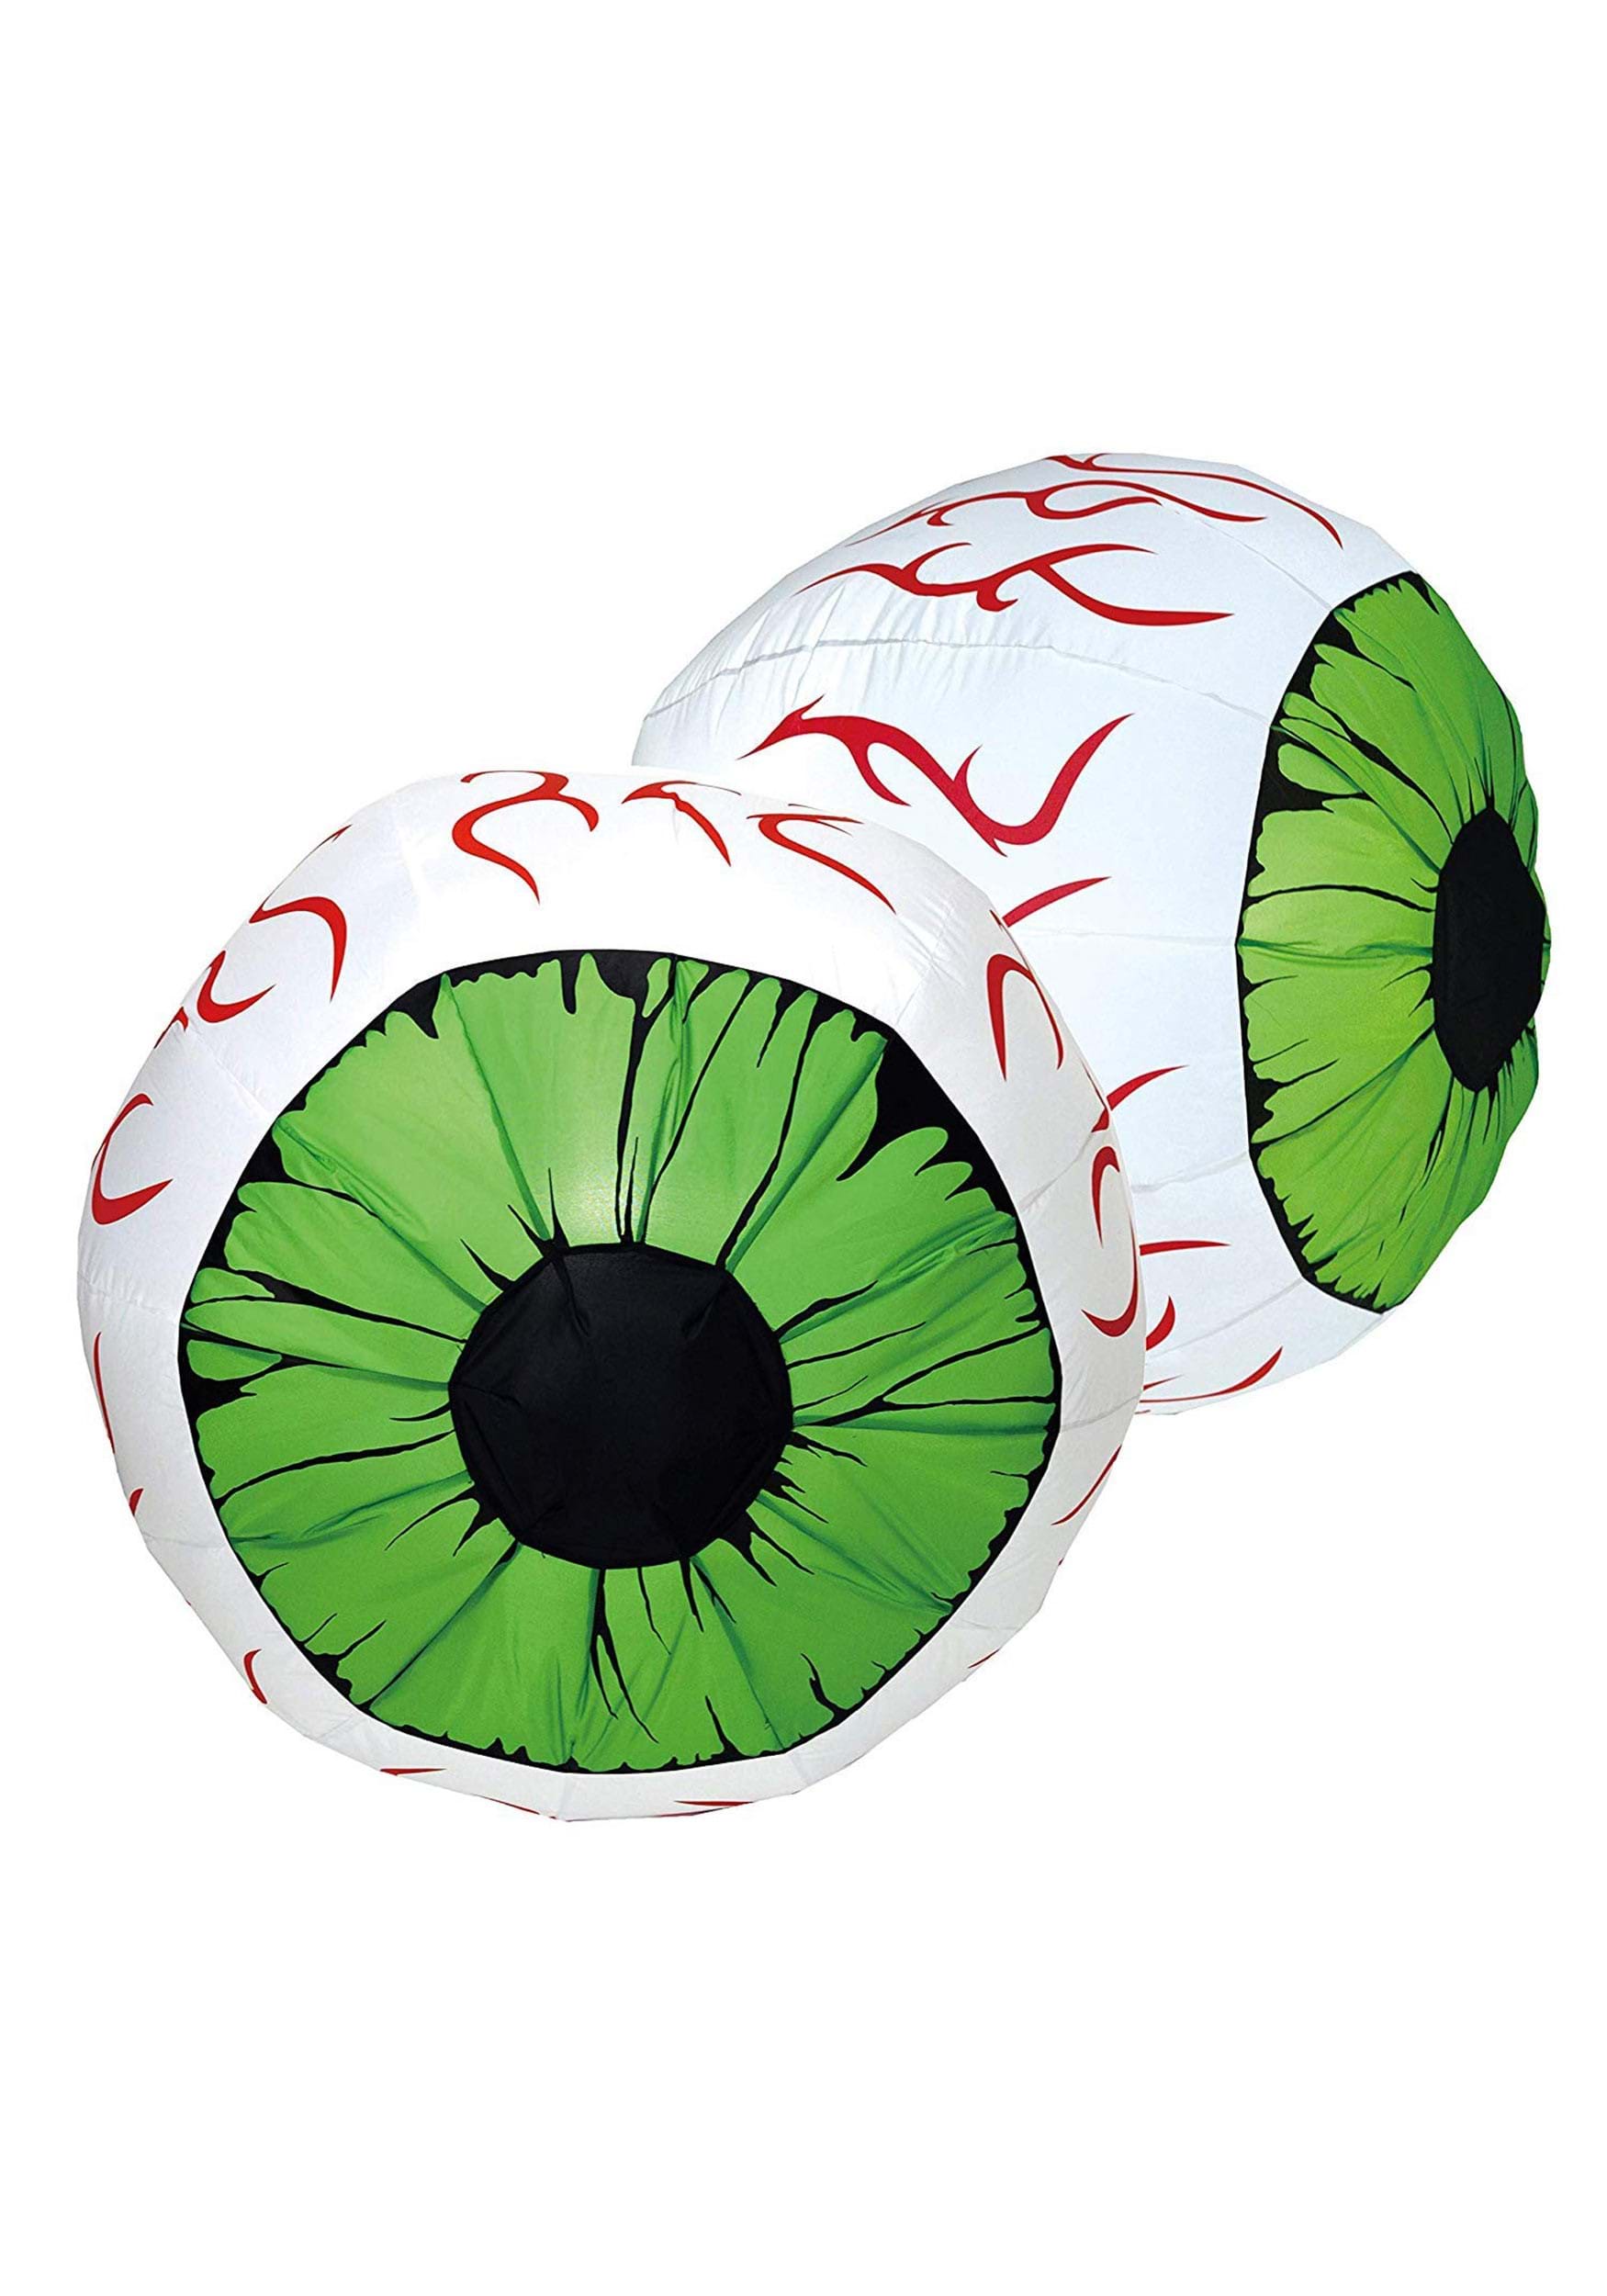 Inflatable Eyeballs Halloween Decorations Scary Props Table Decorations 4" 